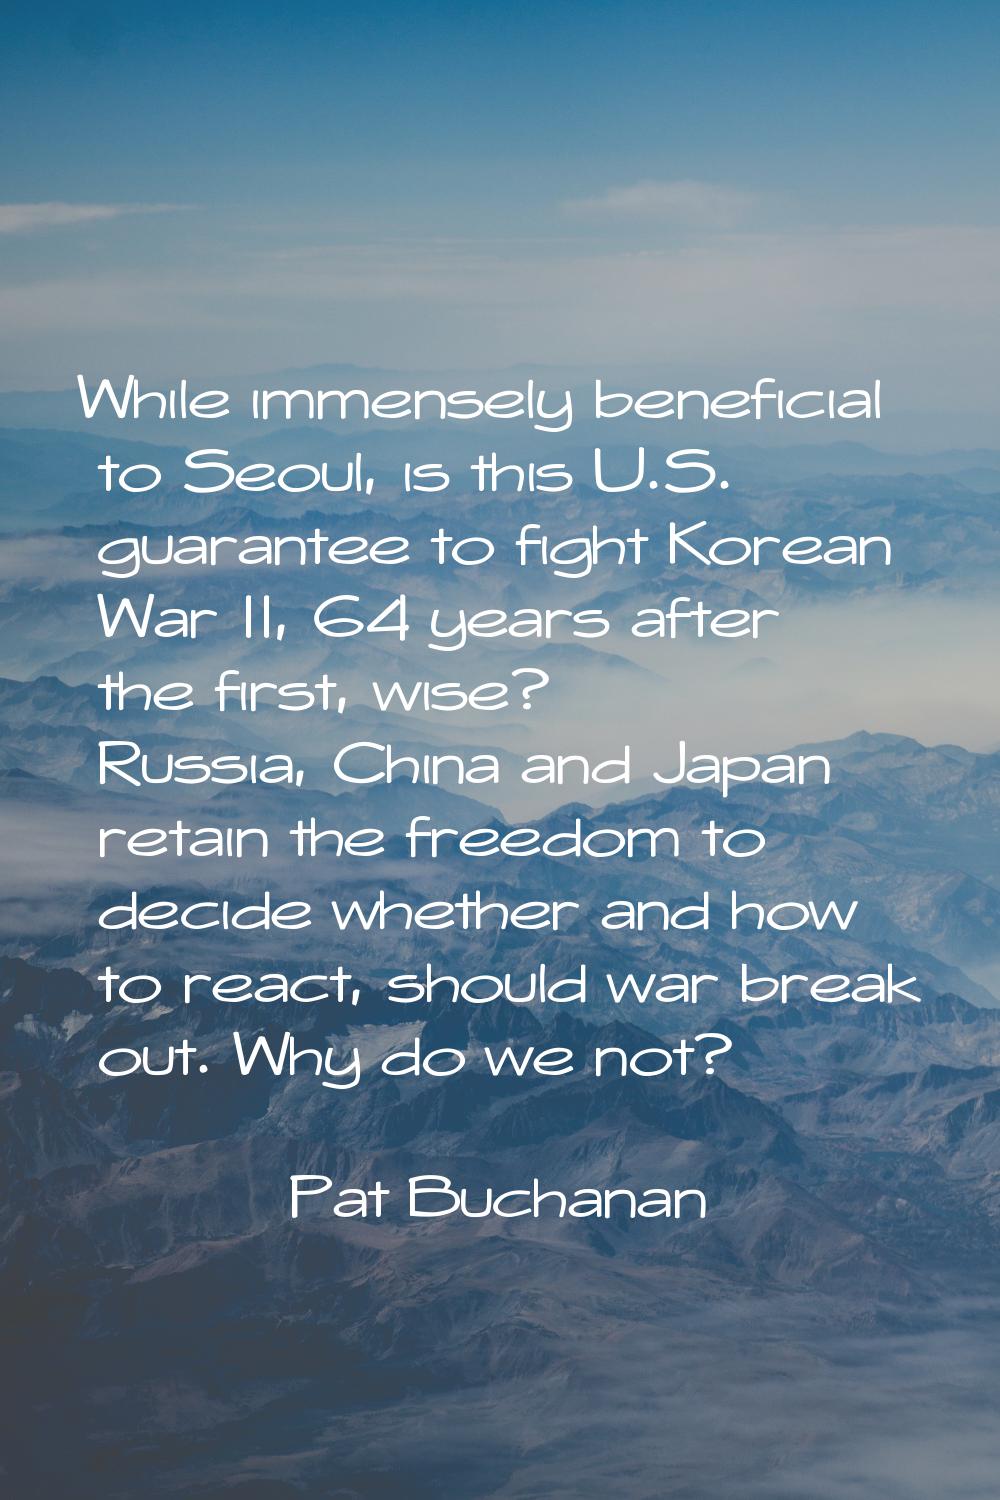 While immensely beneficial to Seoul, is this U.S. guarantee to fight Korean War II, 64 years after 